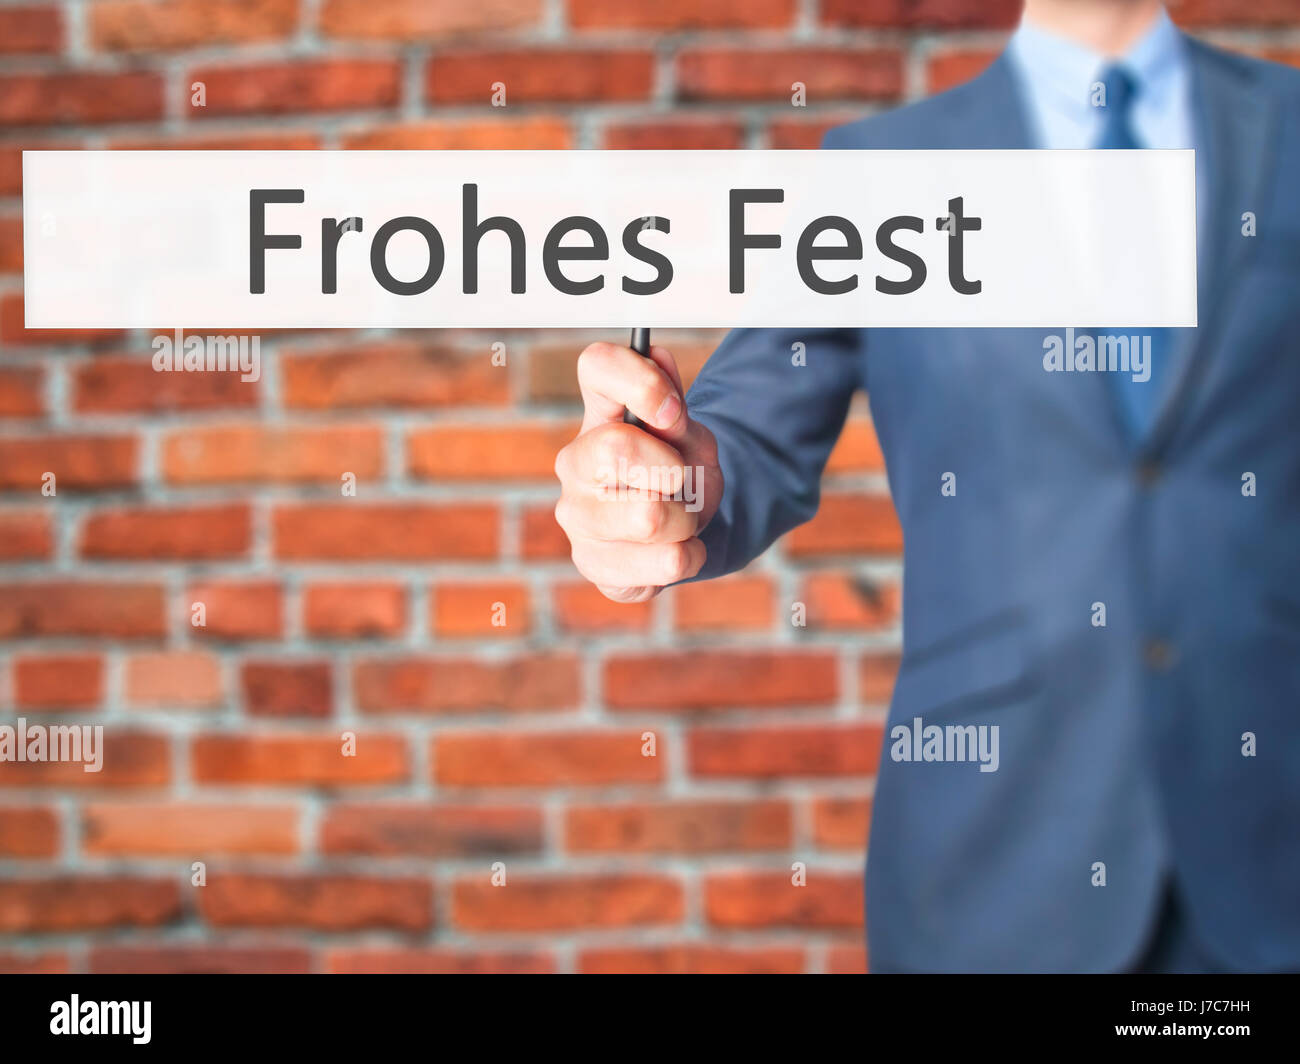 frohes fest (Happy Christmas in German) - Businessman hand holding sign. Business, technology, internet concept. Stock Photo Stock Photo